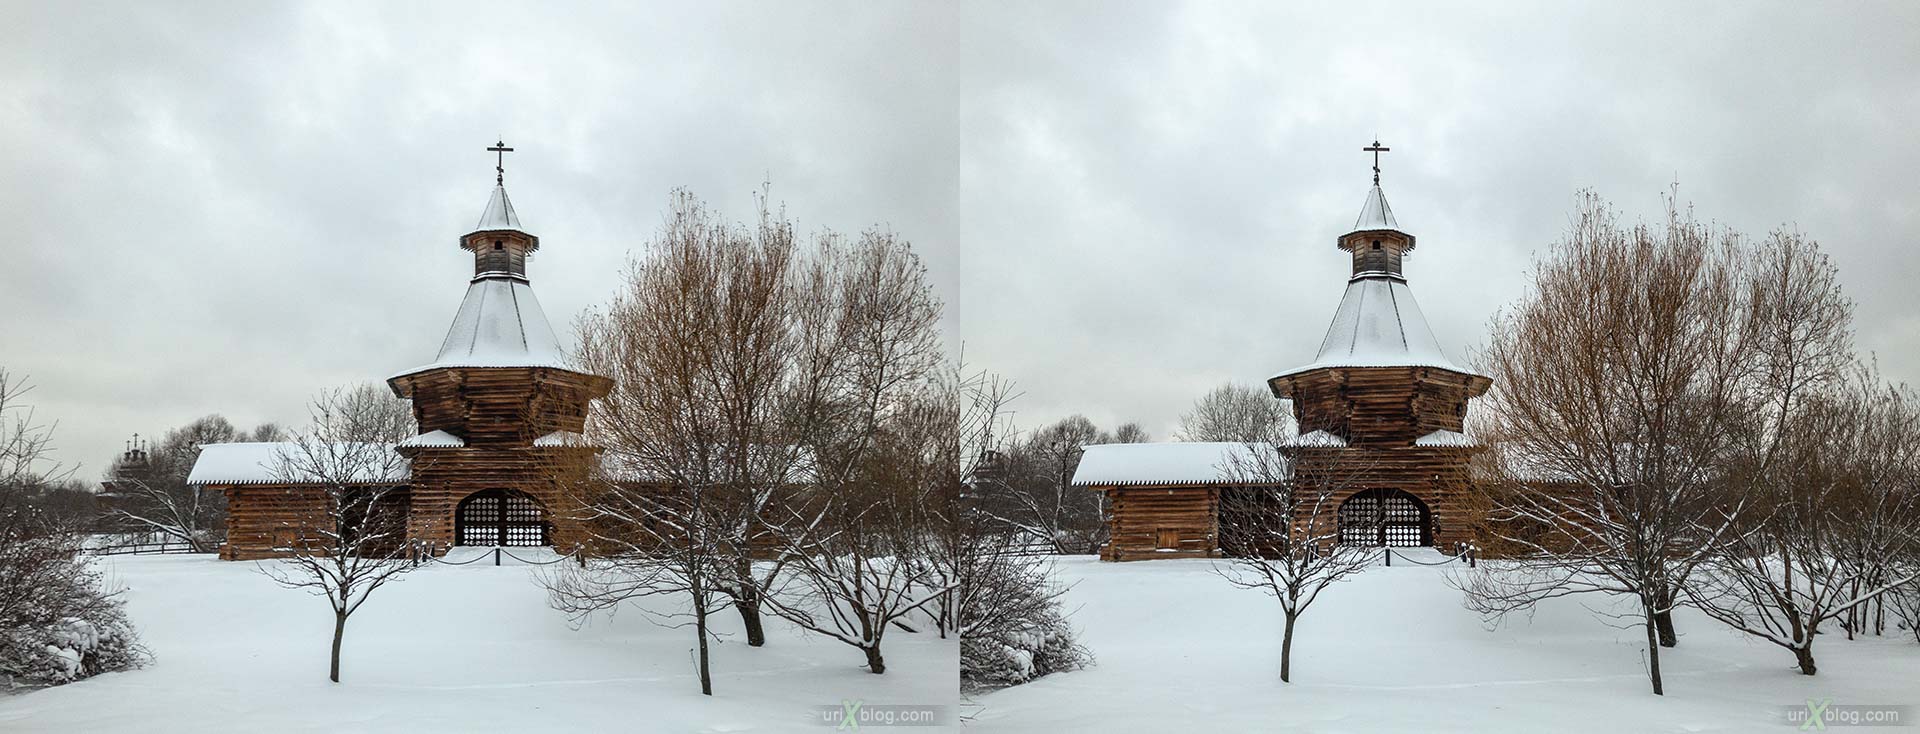 Russian Wooden Architecture, tower of the Nikolo-Korelsky monastery, Kolomenskoye, park, wooden building, winter, snow, Moscow, Russia, 3D, stereo pair, cross-eyed, crossview, cross view stereo pair, stereoscopic